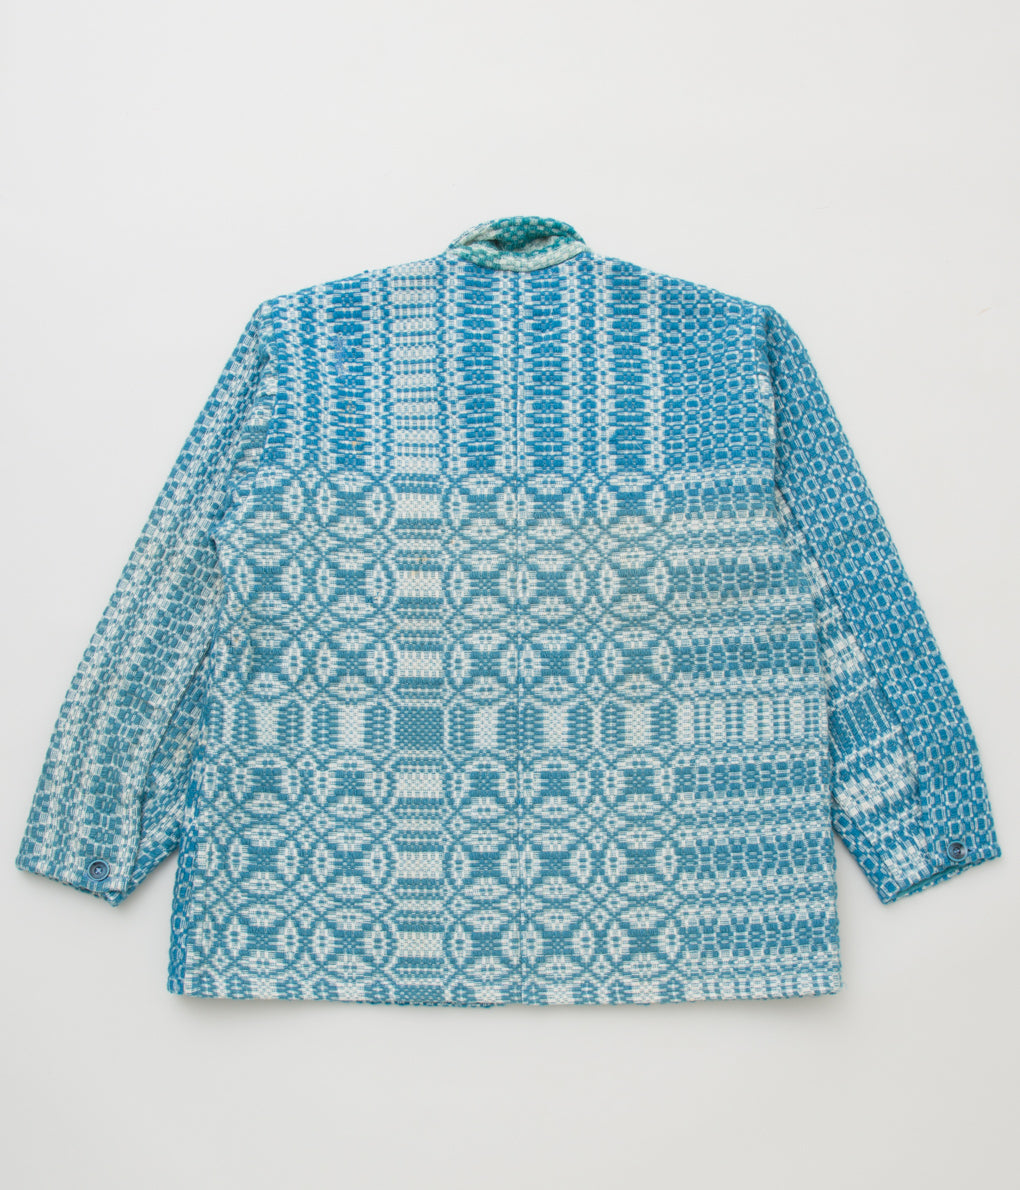 FAREWELL FRANCES "WOOL COVERLET CLAUDE COAT"(TURQUOISE COVERLET)